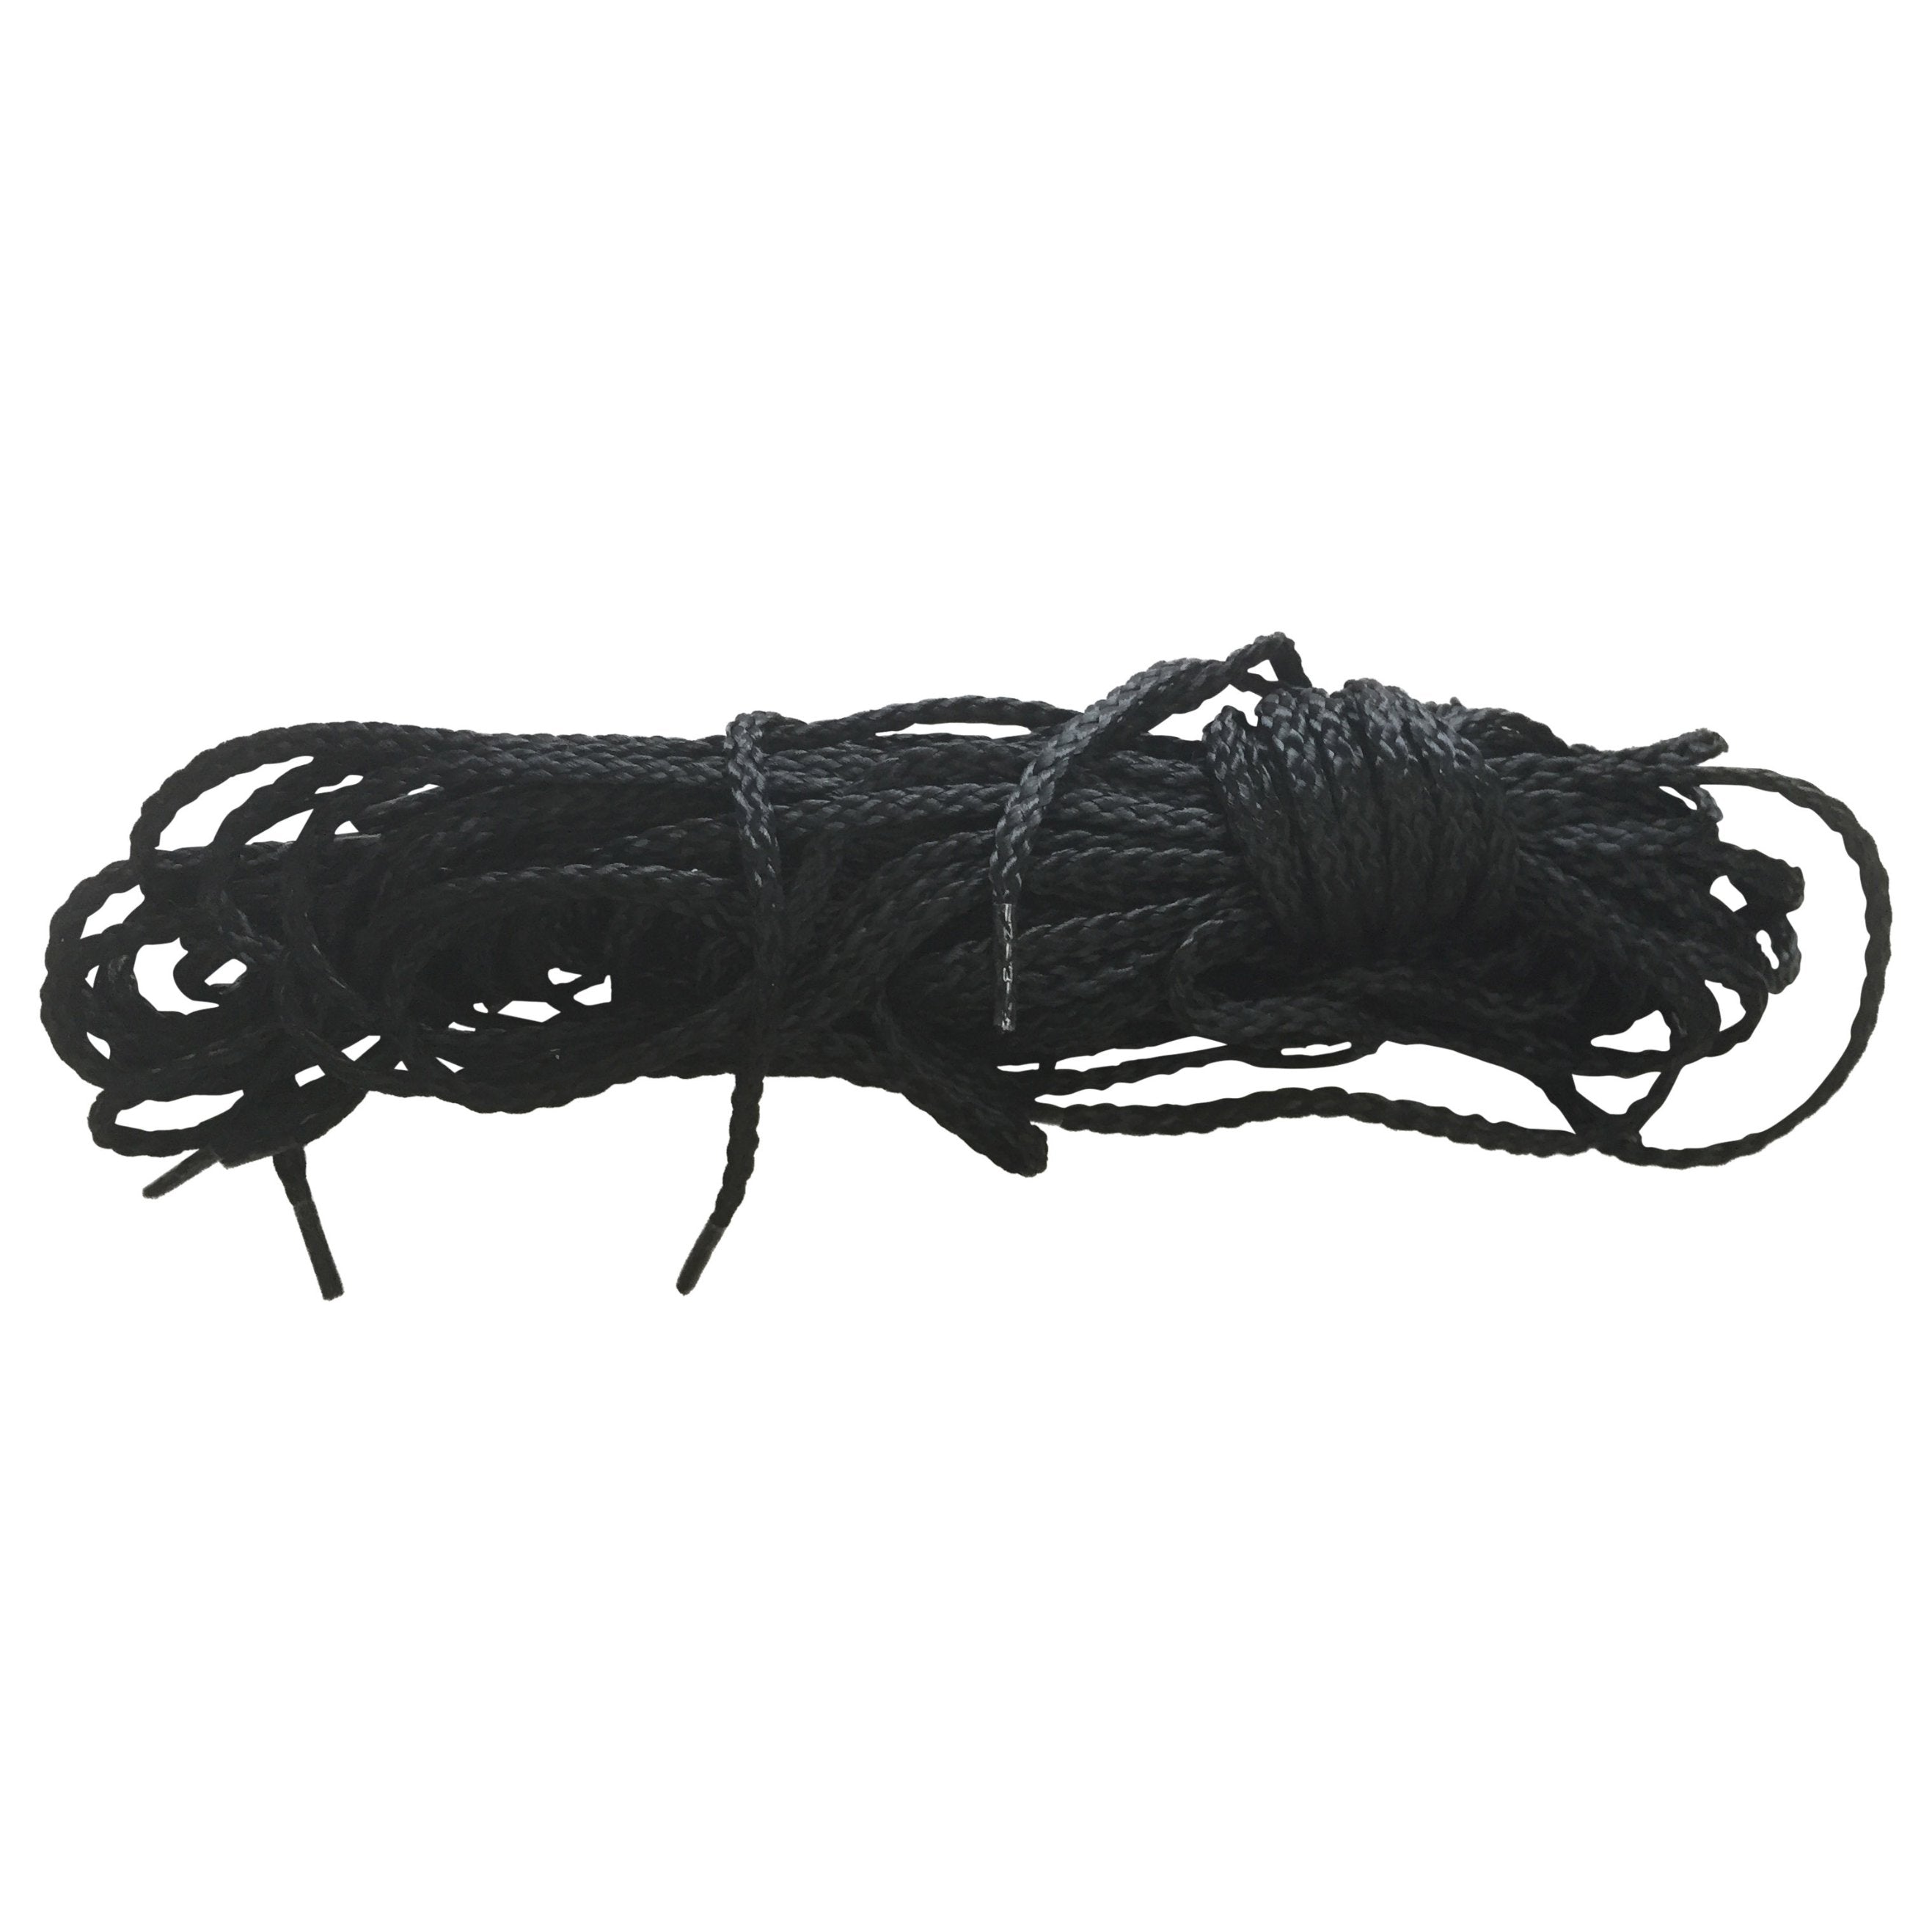 Ultima 4 8ft Trampoline Part Number H - Cord